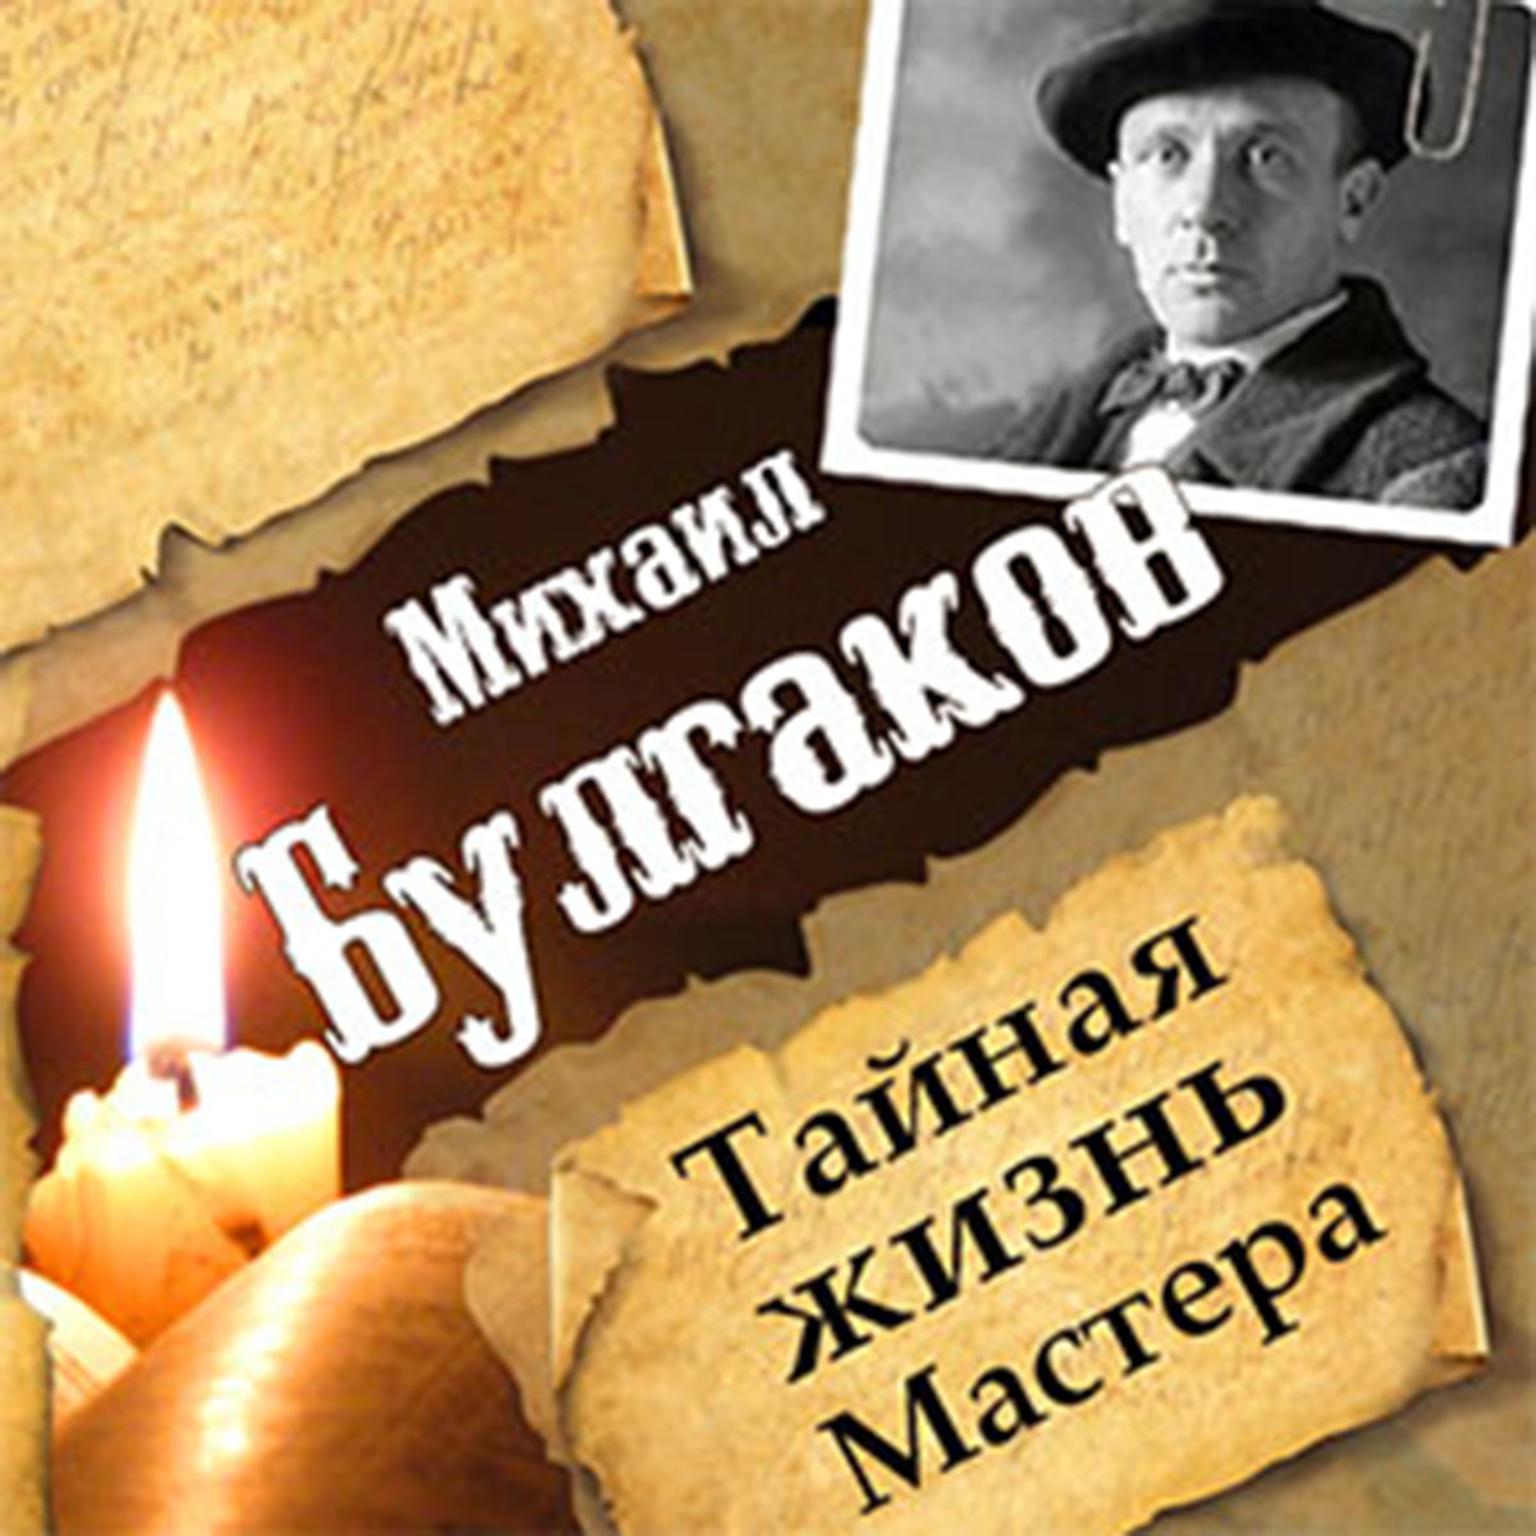 Mikhail Bulgakov. The Secret Life of the Master [Russian Edition] Audiobook, by Leonid Garin